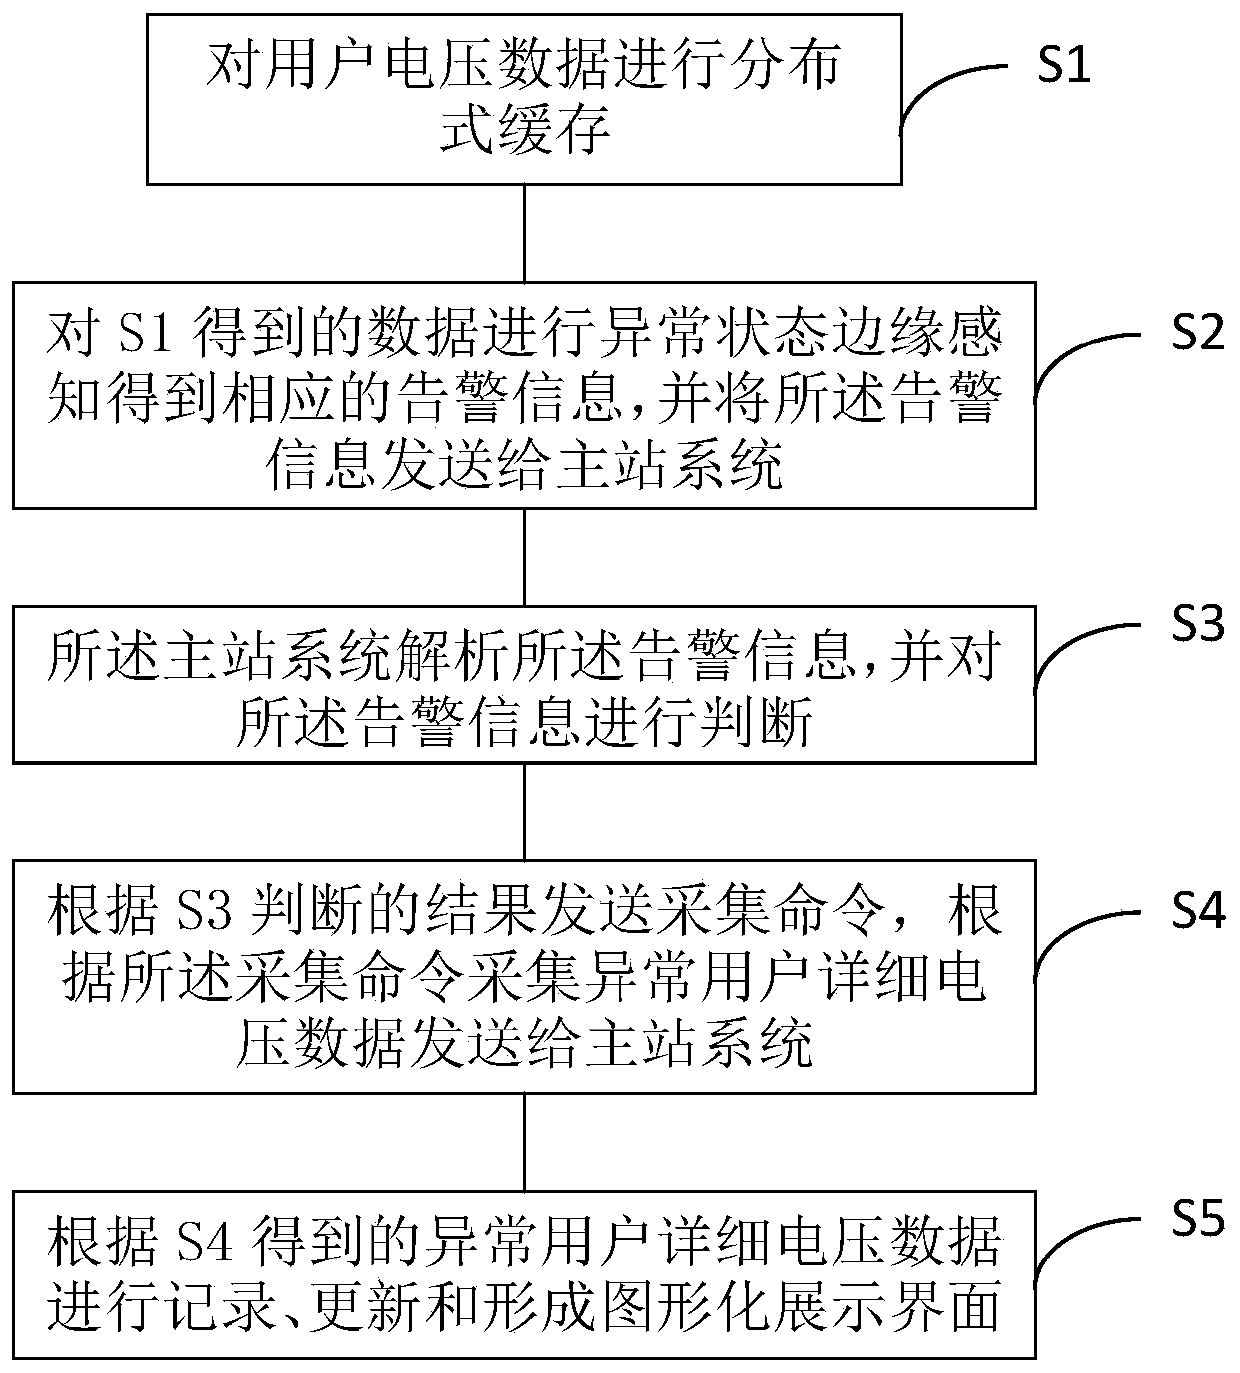 User voltage abnormality sensing method and system based on edge calculation